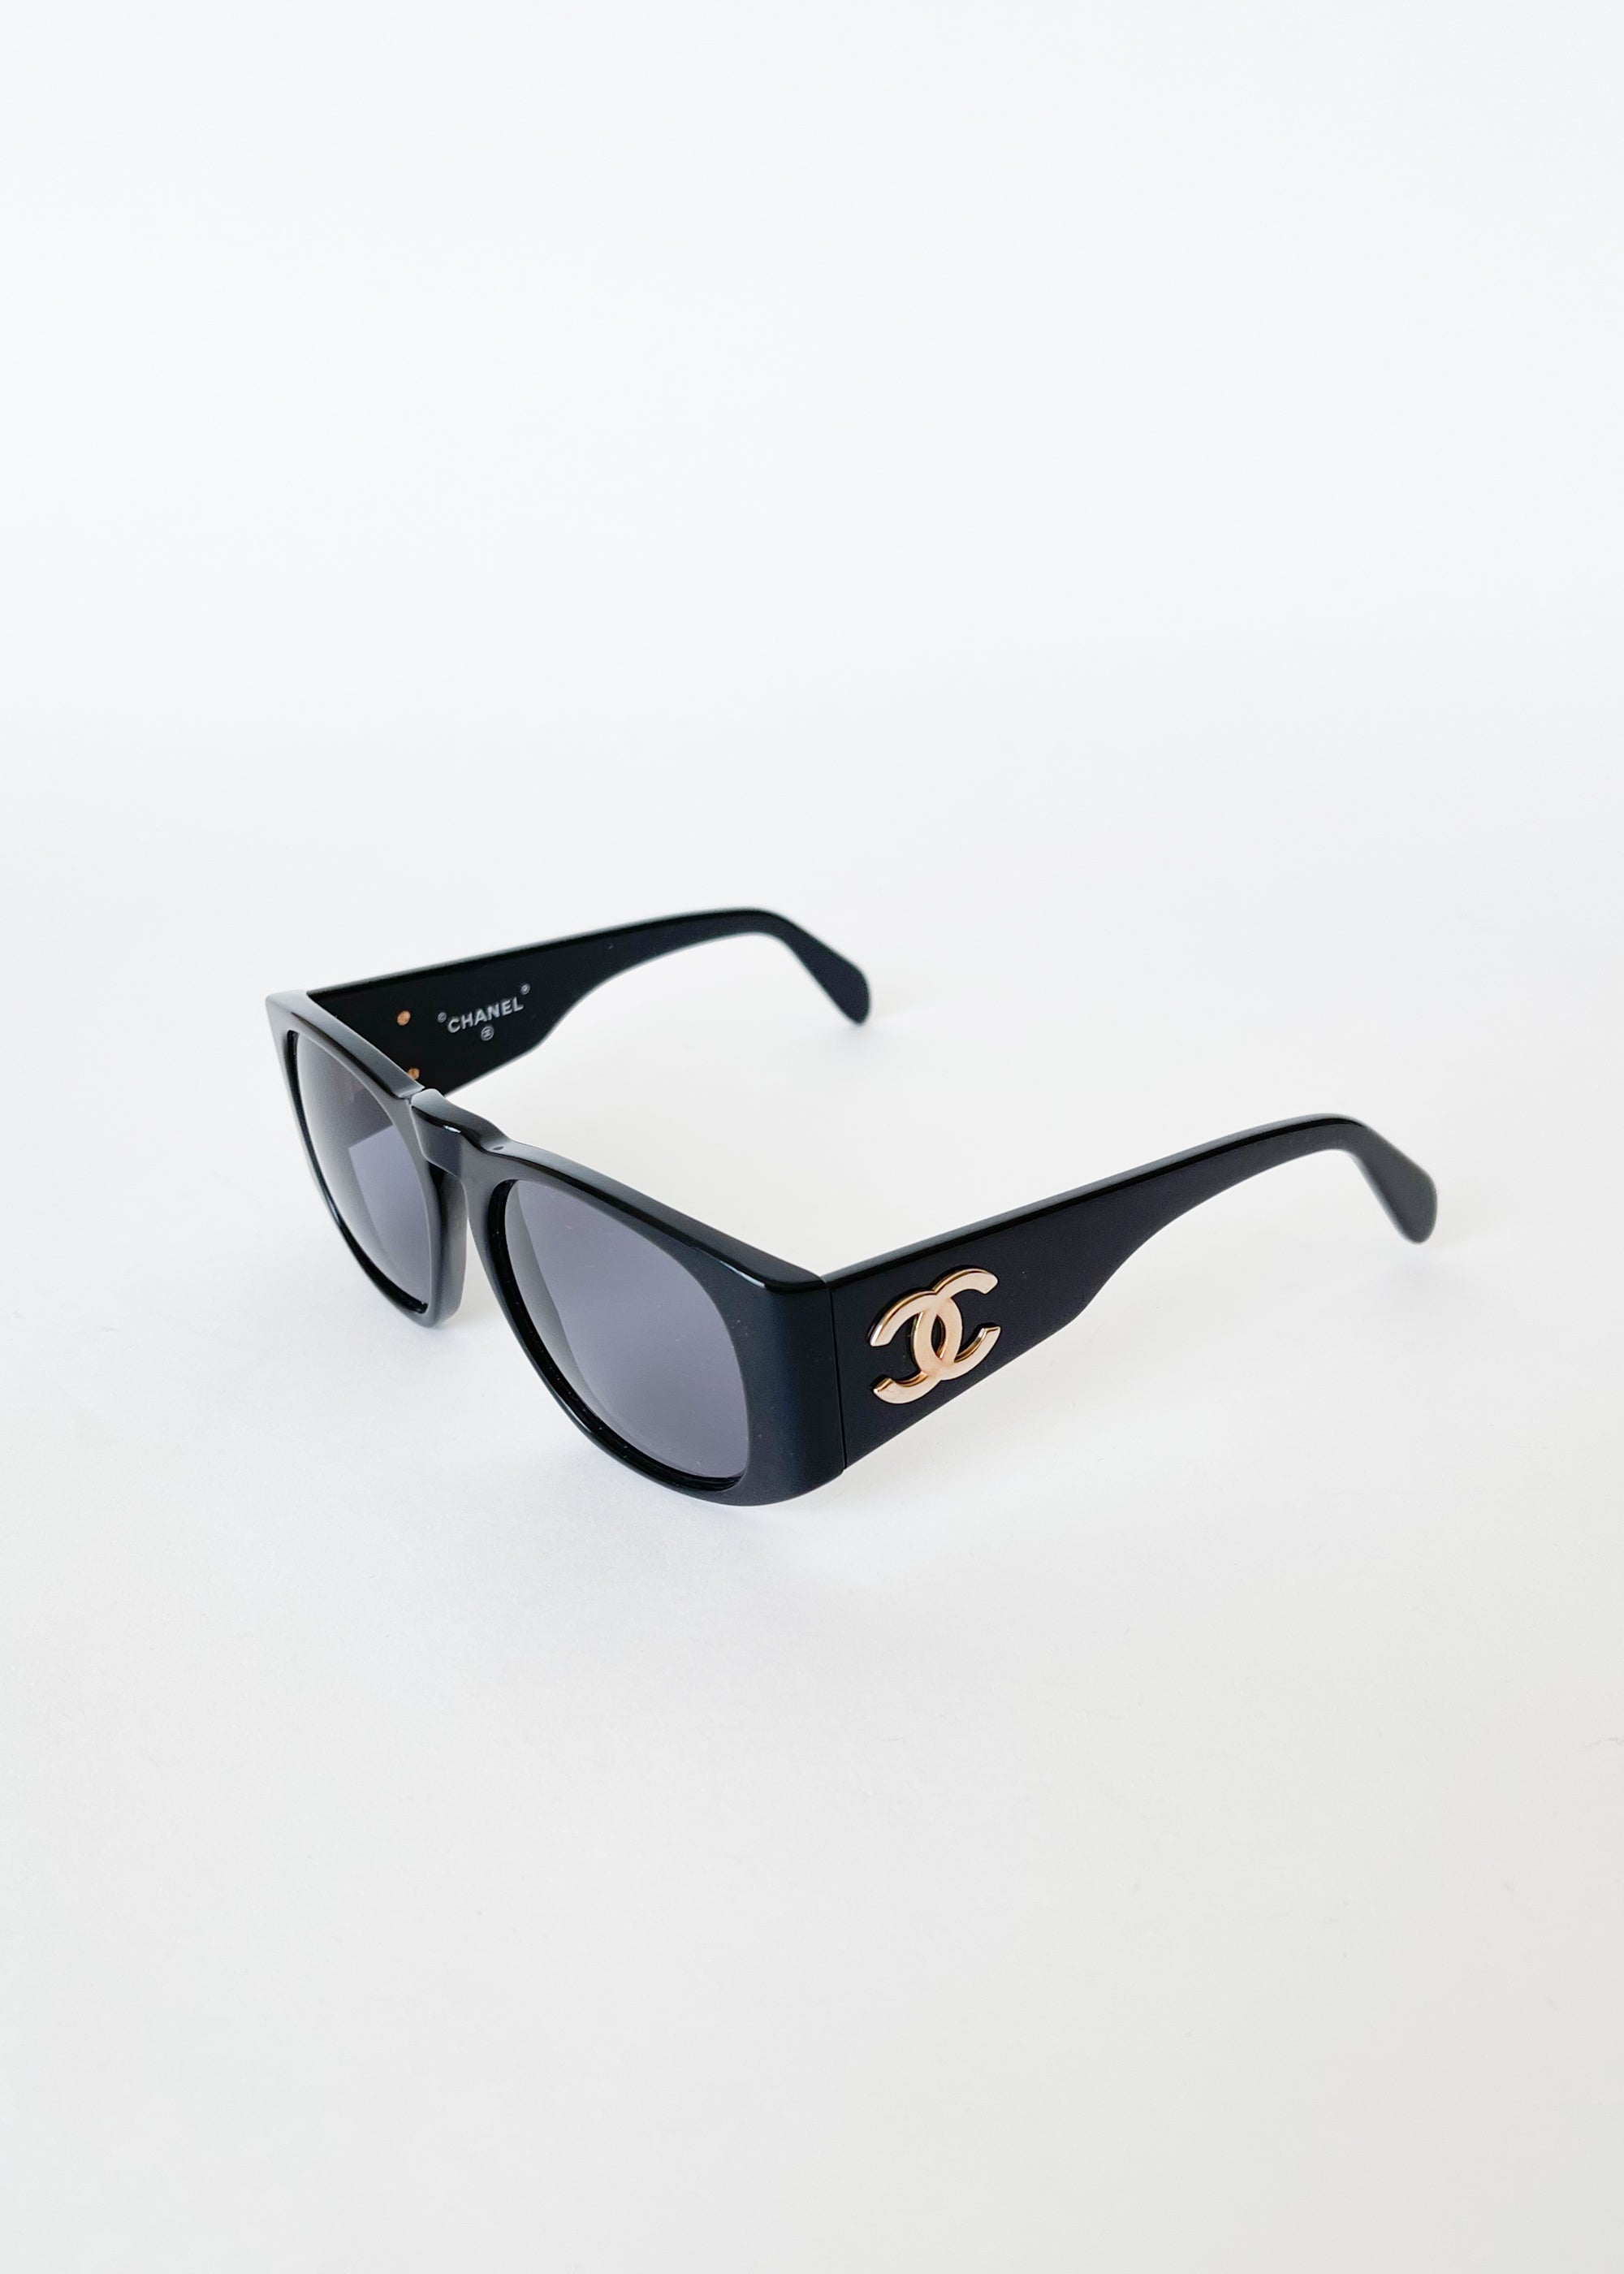 Vintage Late 1980s Chanel Sunglasses - Raleigh Vintage